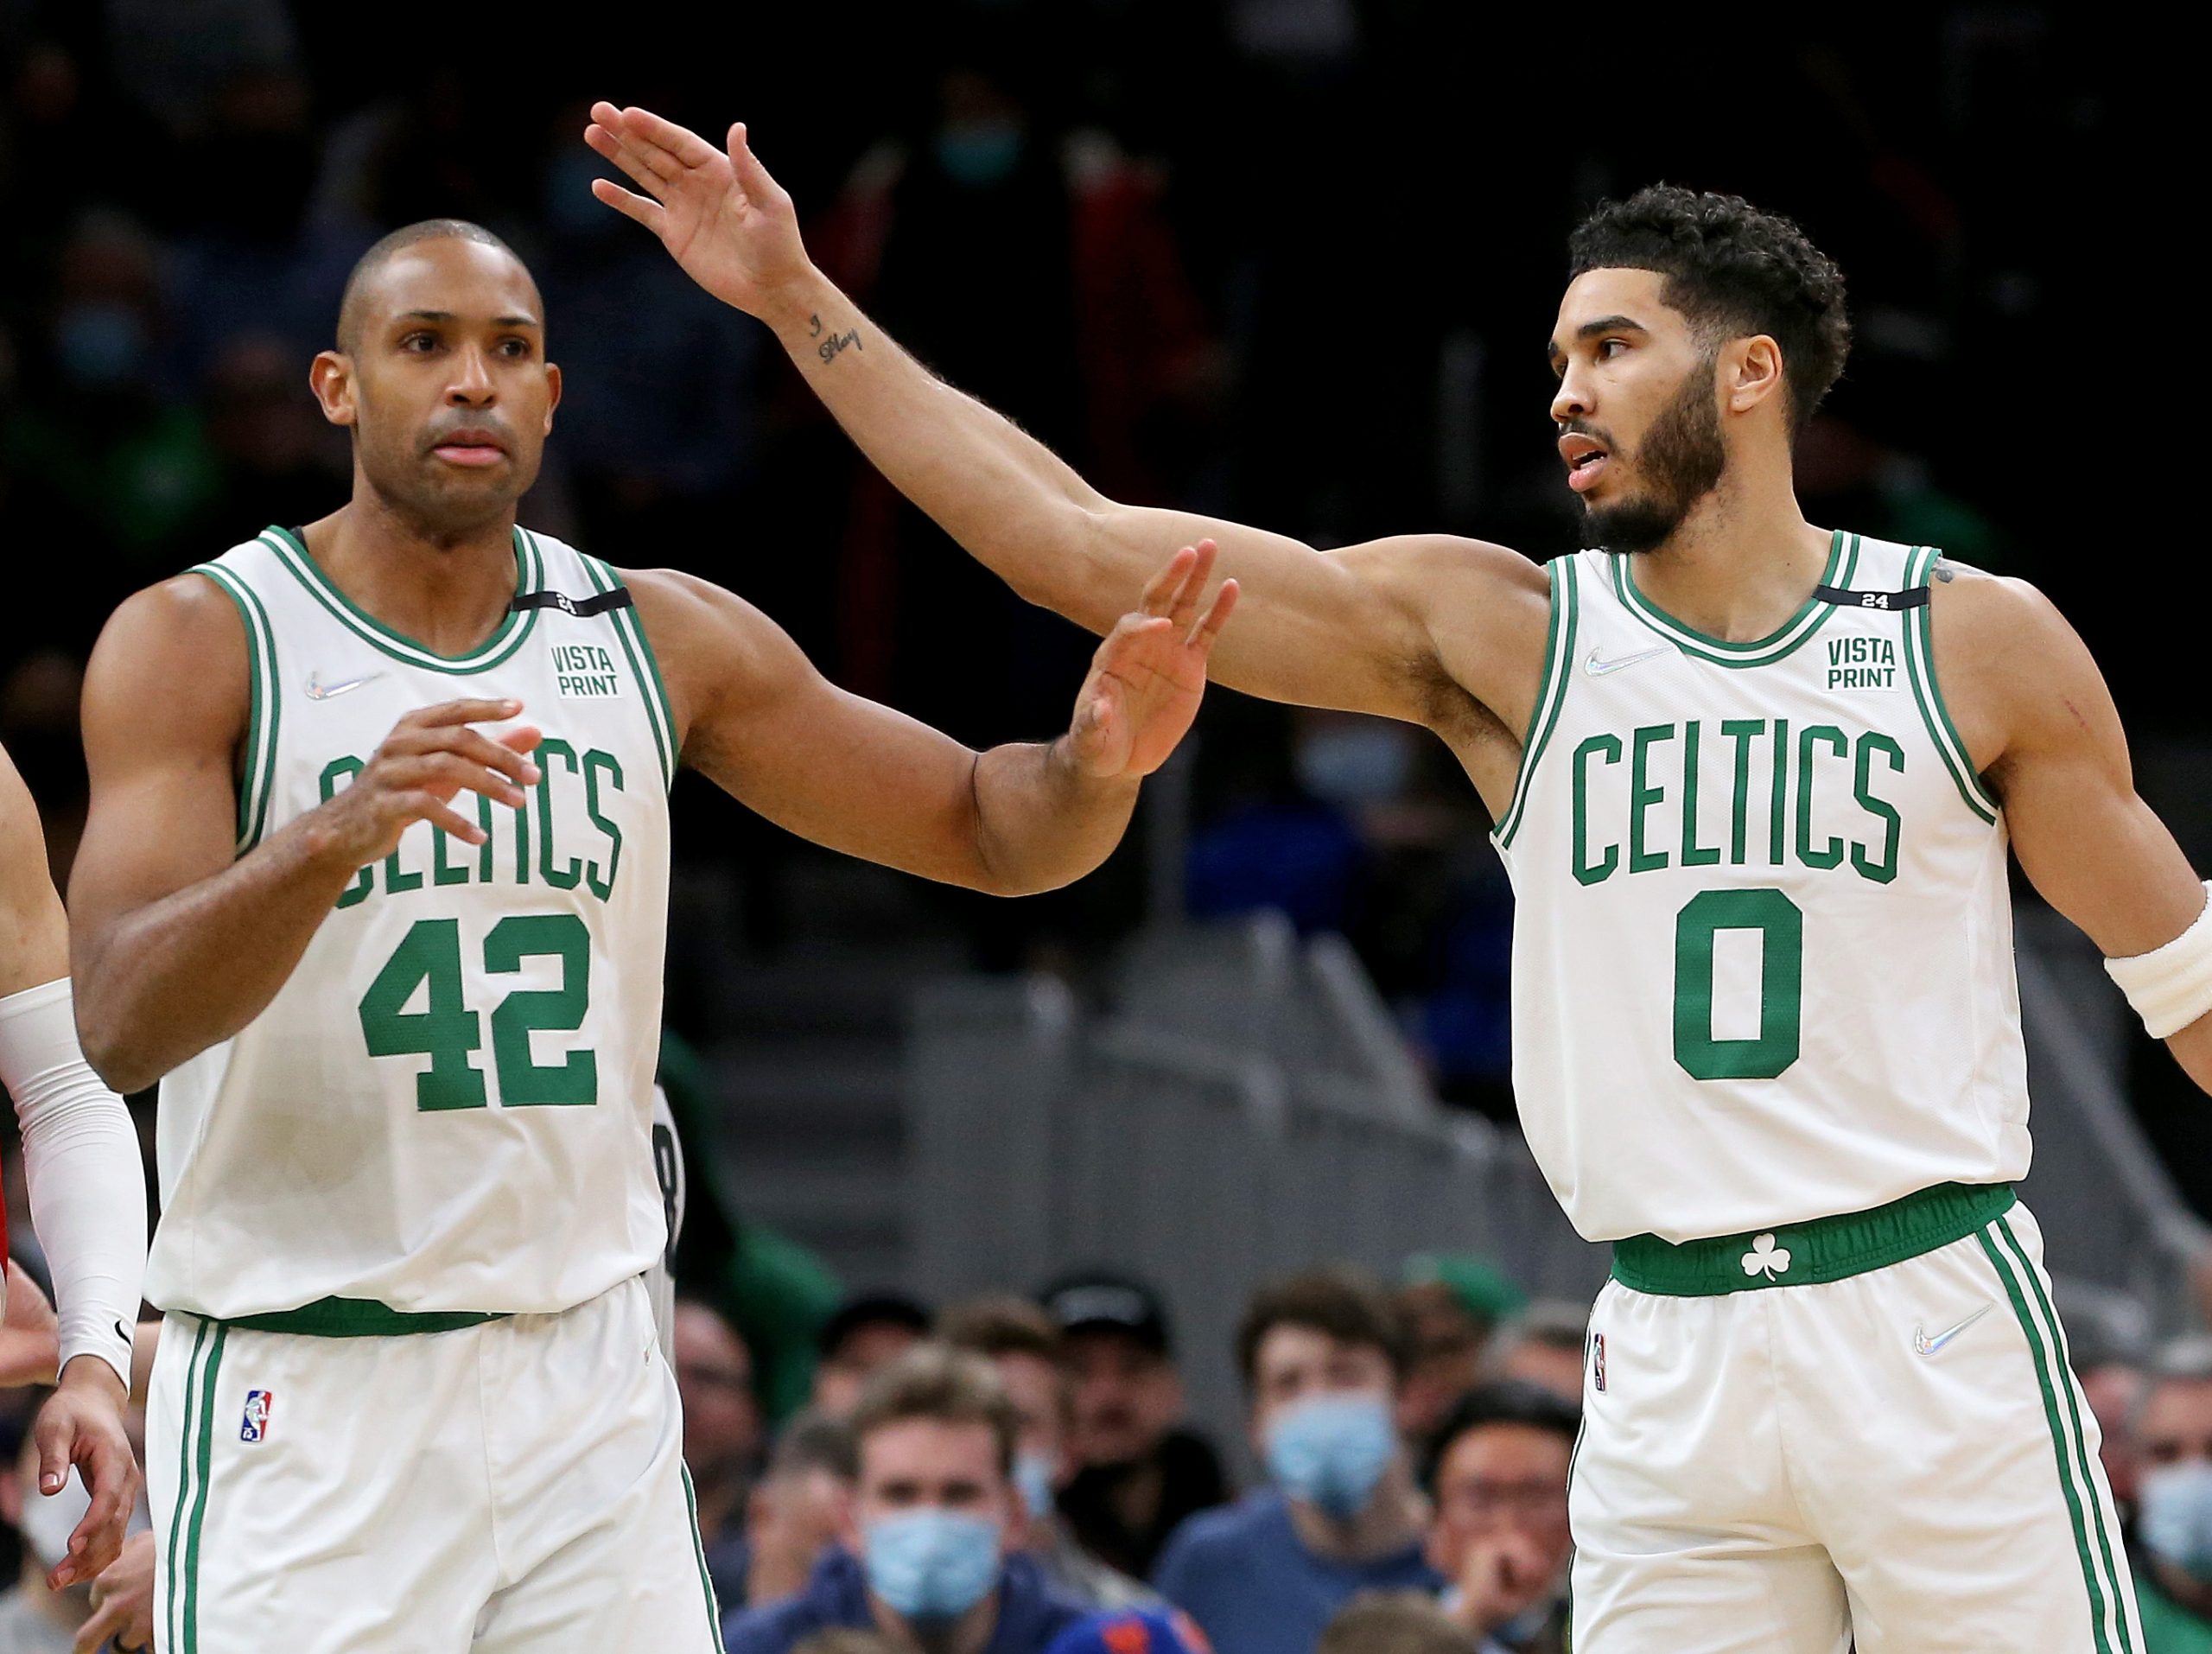 Al Horford #42 and Jayson Tatum #0 of the Boston Celtics celebrate during the first half of the NBA game against the Detroit Pistons.